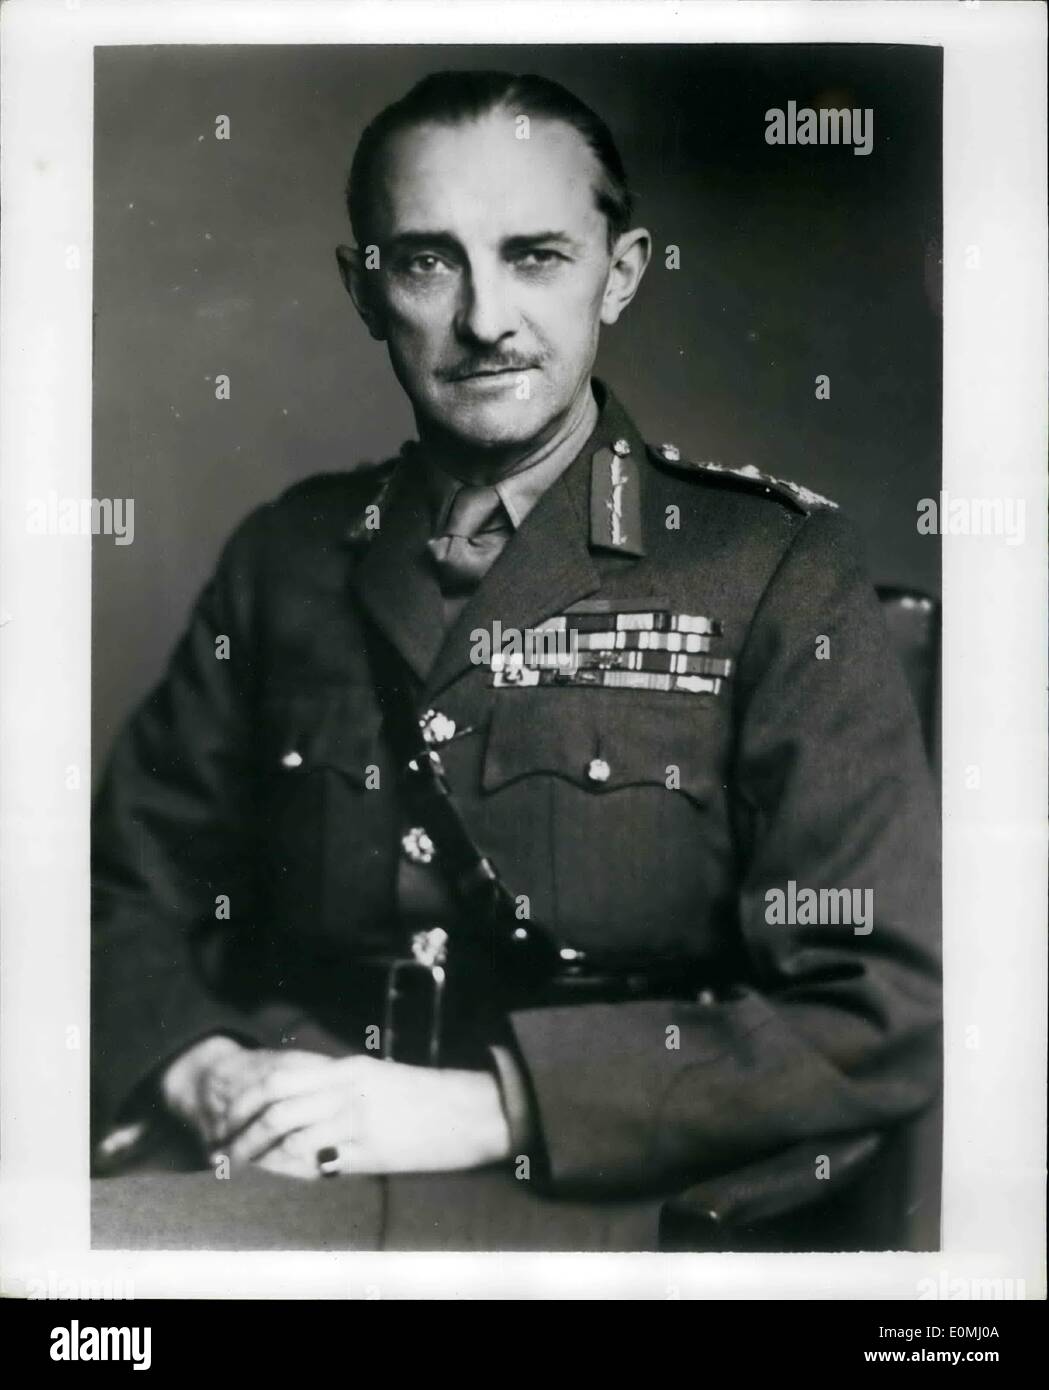 Jun. 06, 1955 - To Rise In The Fall: Britain recently announced promotions for a top soldier and sailor. Photo shows General Sir Gerald Templer who in November will be Britain's top soldier, Chief of the Imperial General Staff. Now 57, in 1942 General Templer, at the age of 44, became the youngest Lt. General in the British Army. After the war he was made Director for Civil Affairs, Military Government, in occupied Germany and in 1946 became Director of Military Intelligence at the War Office, London Stock Photo